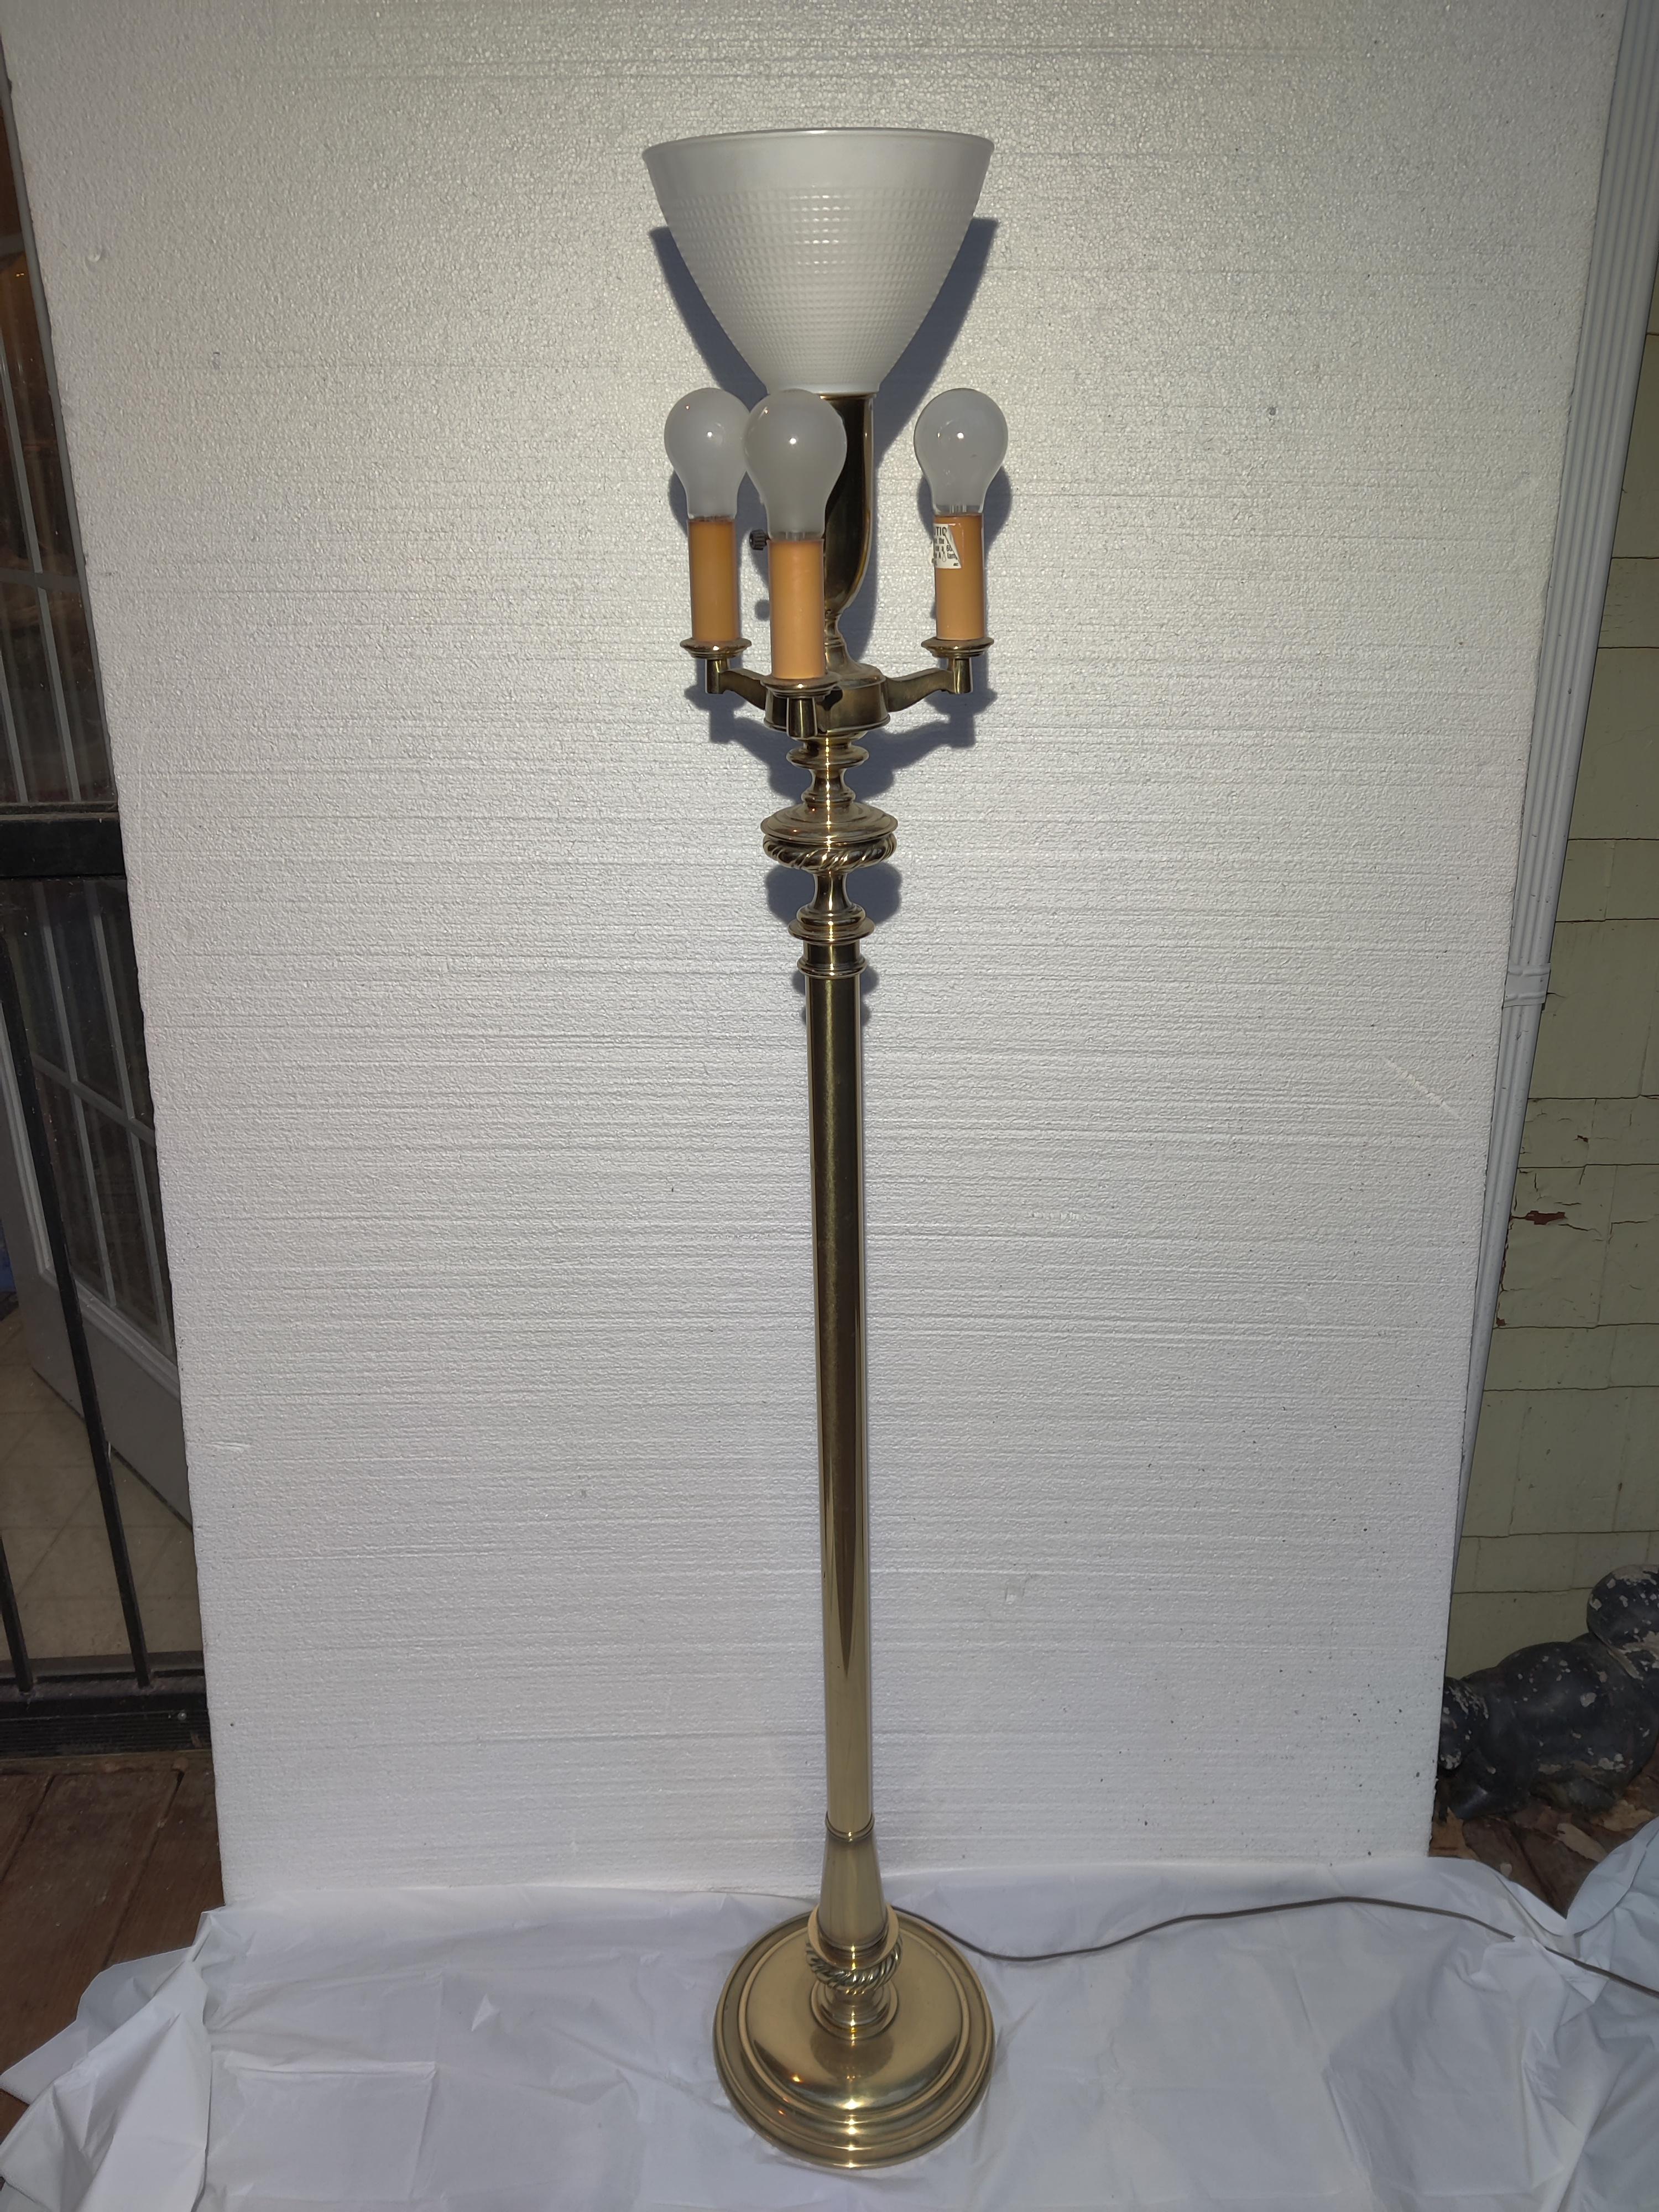 Stiffel Brass Floor Lamp
3 lights plus 1 mogul Light
Lights turn on separate with our without mogul.
Milk glass shade in good condition, no chips.
Brass is in good condition, some wear.
Shade at top is 8